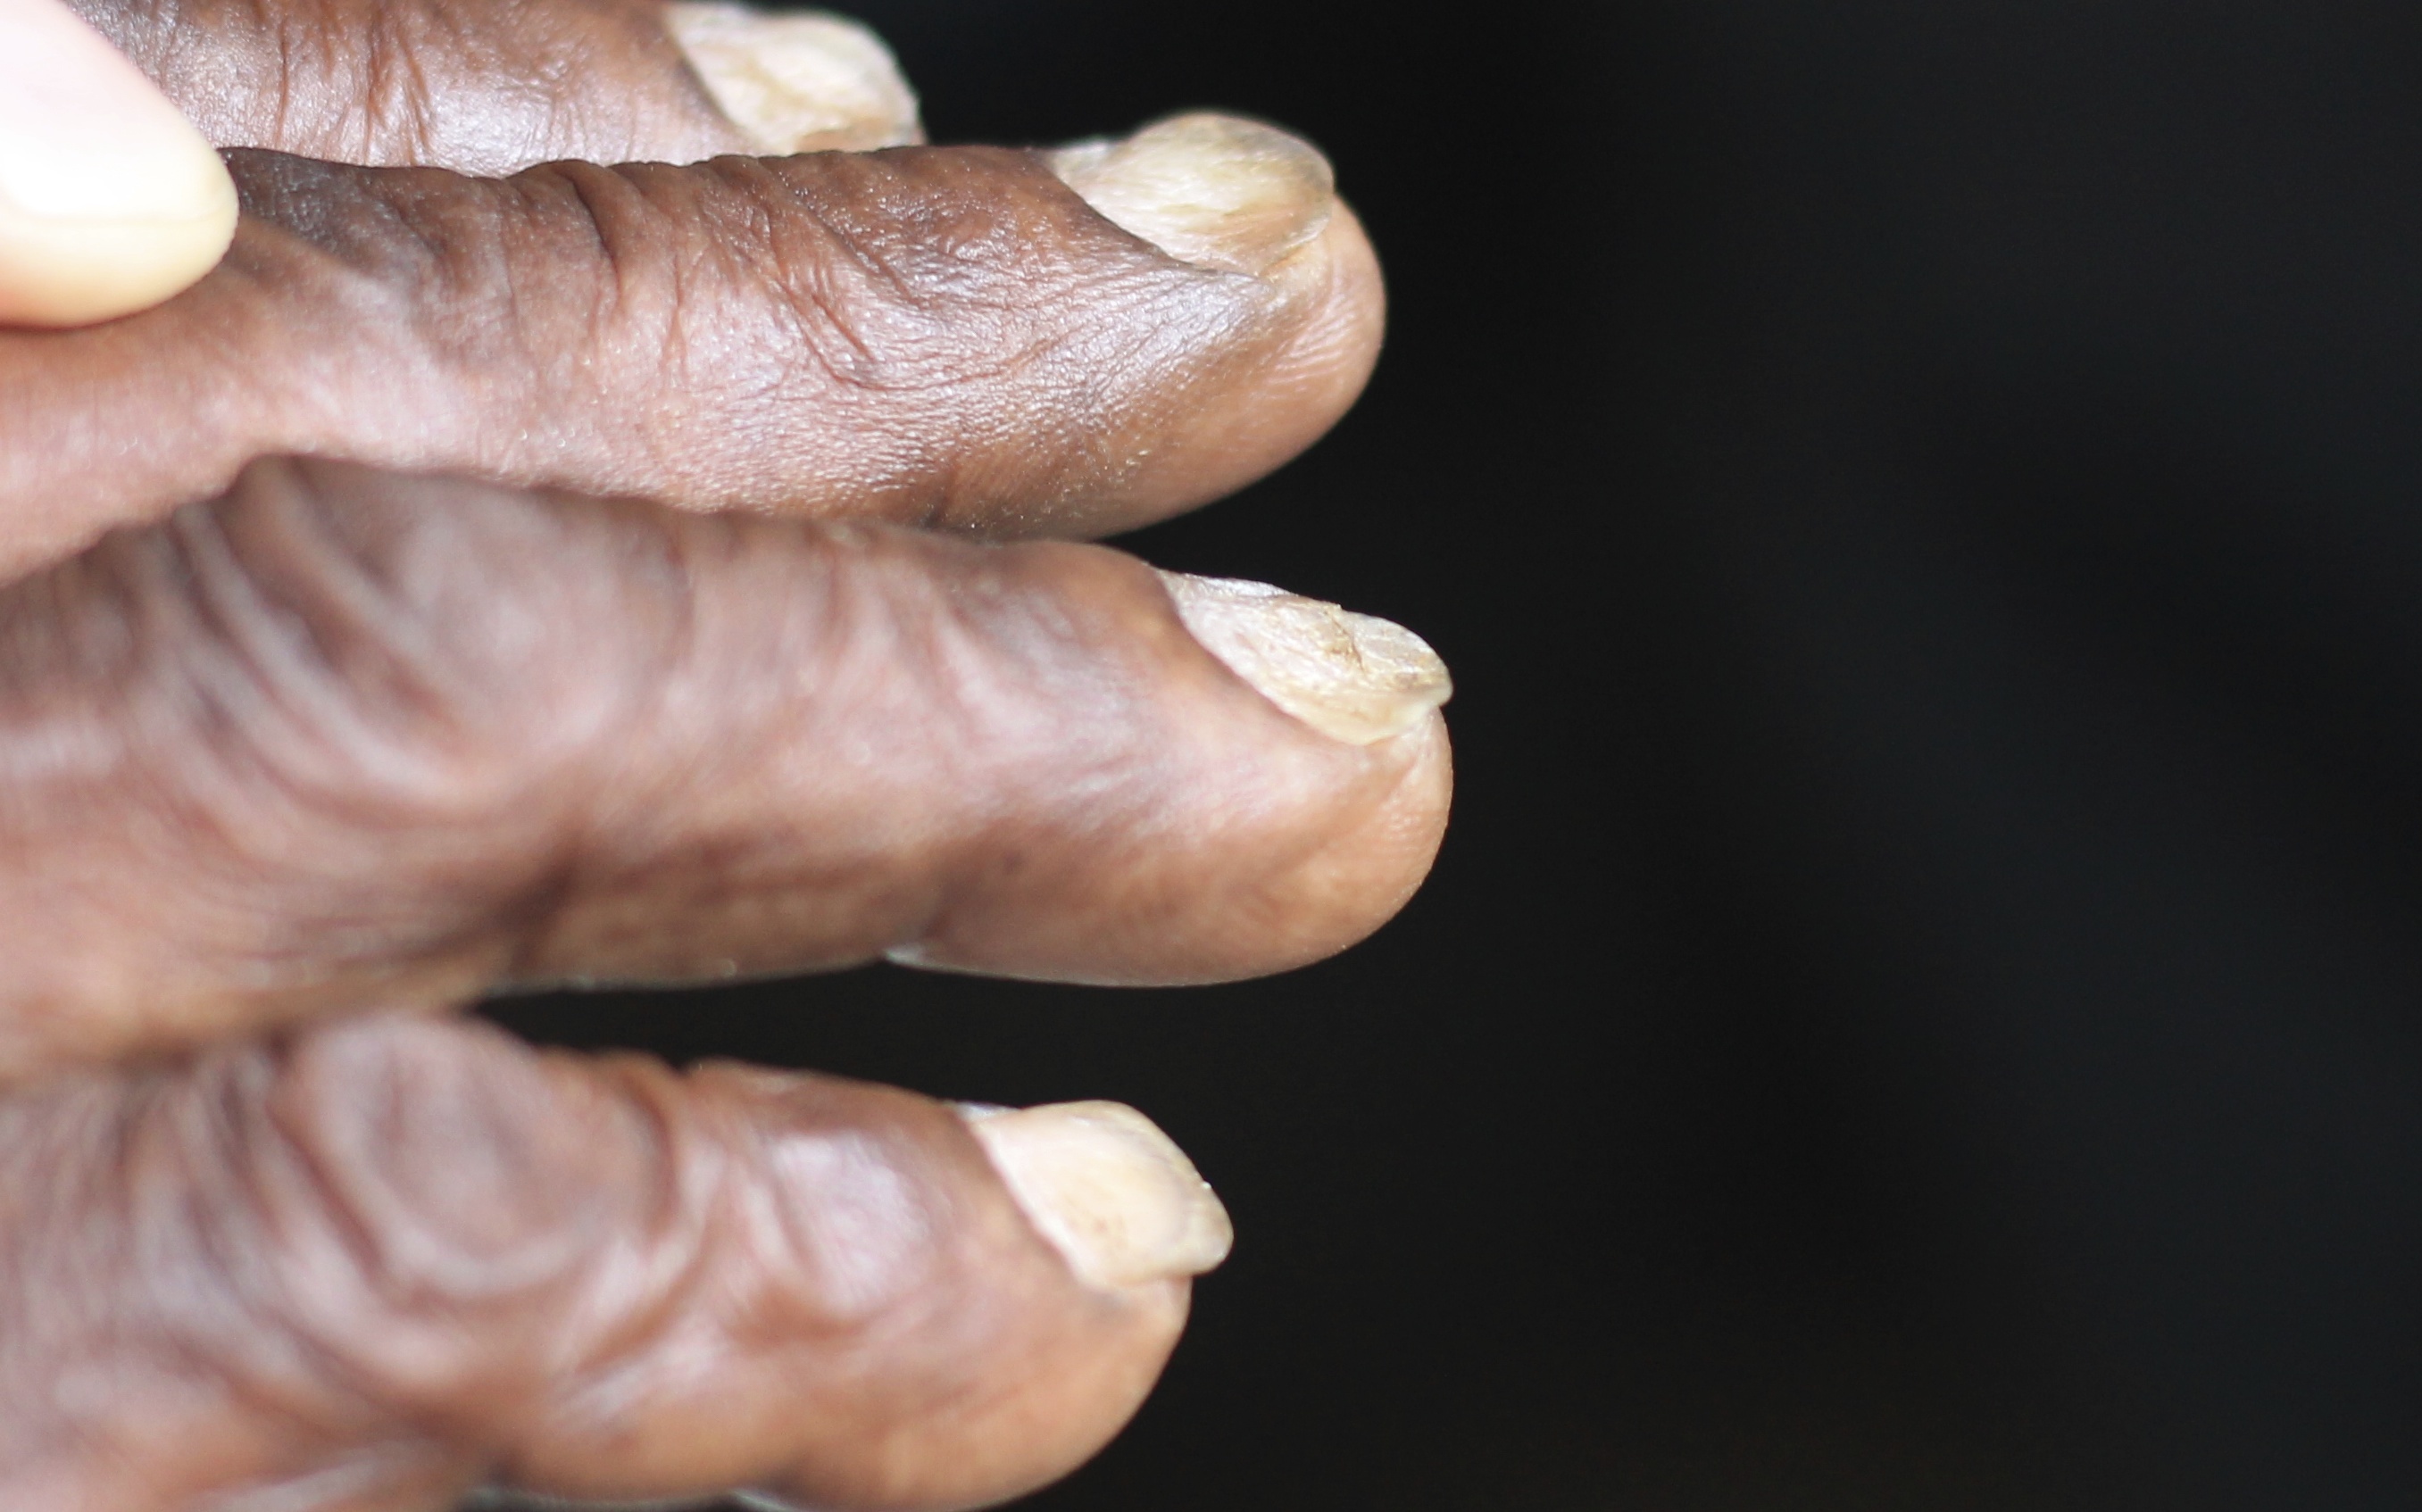 close up of hands with spoon-shaped nails